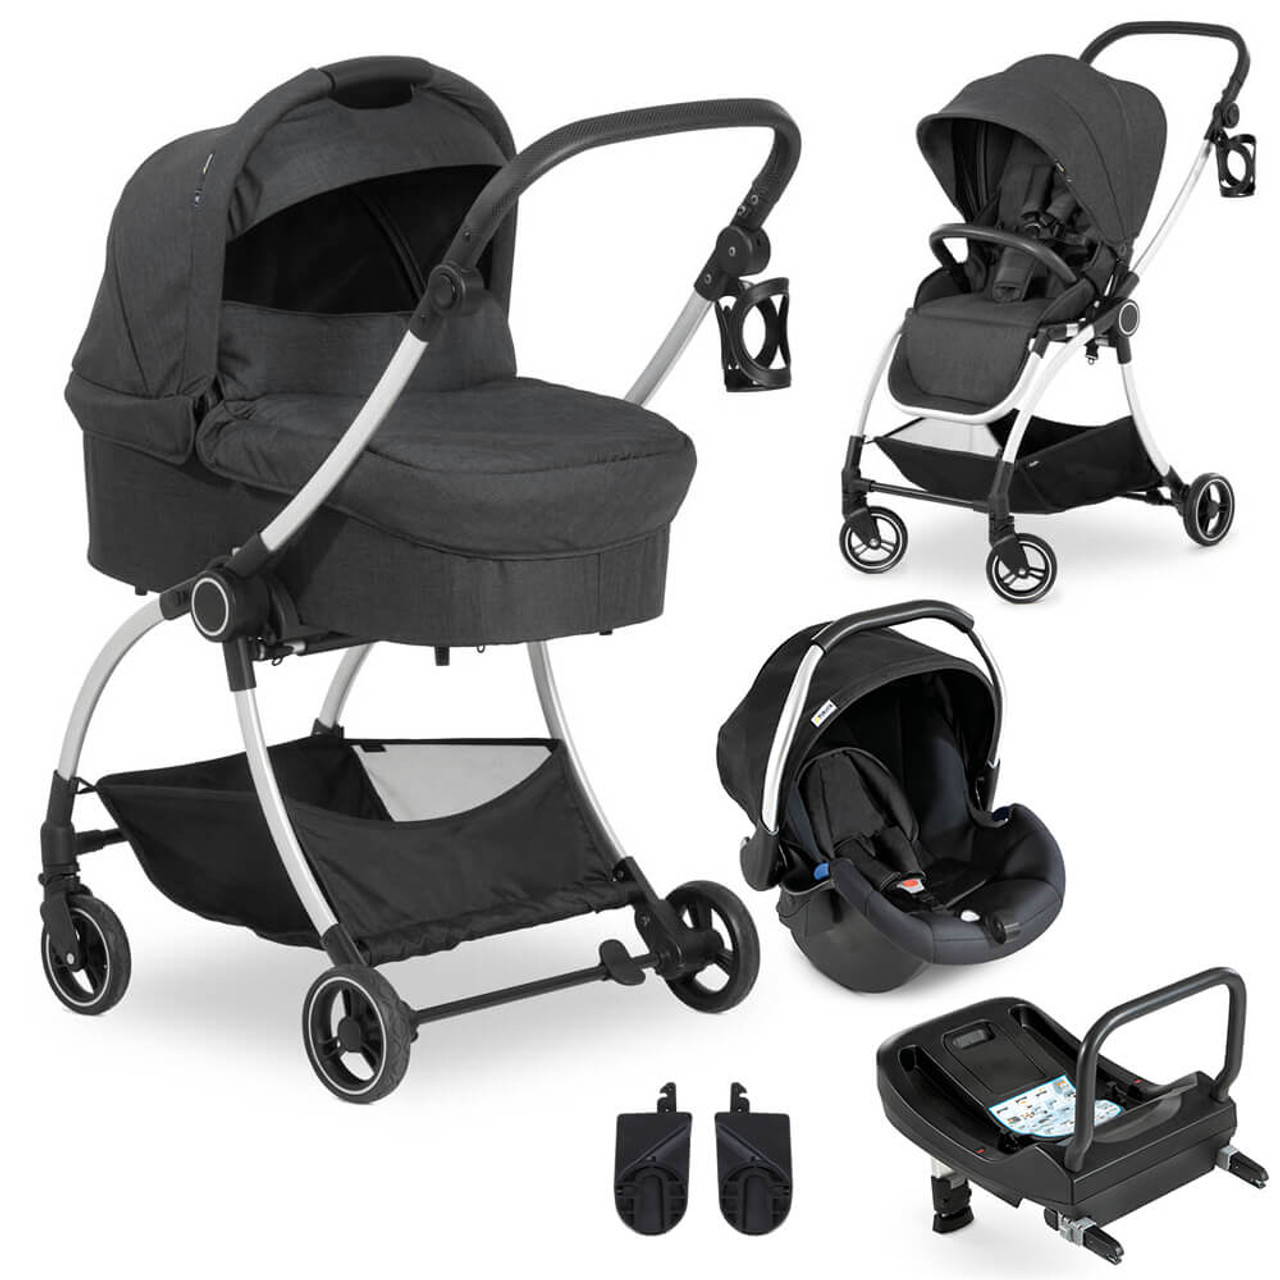 Hauck Colibri NEW Ultra Compact Travel System 2021, Weighs 7kg!